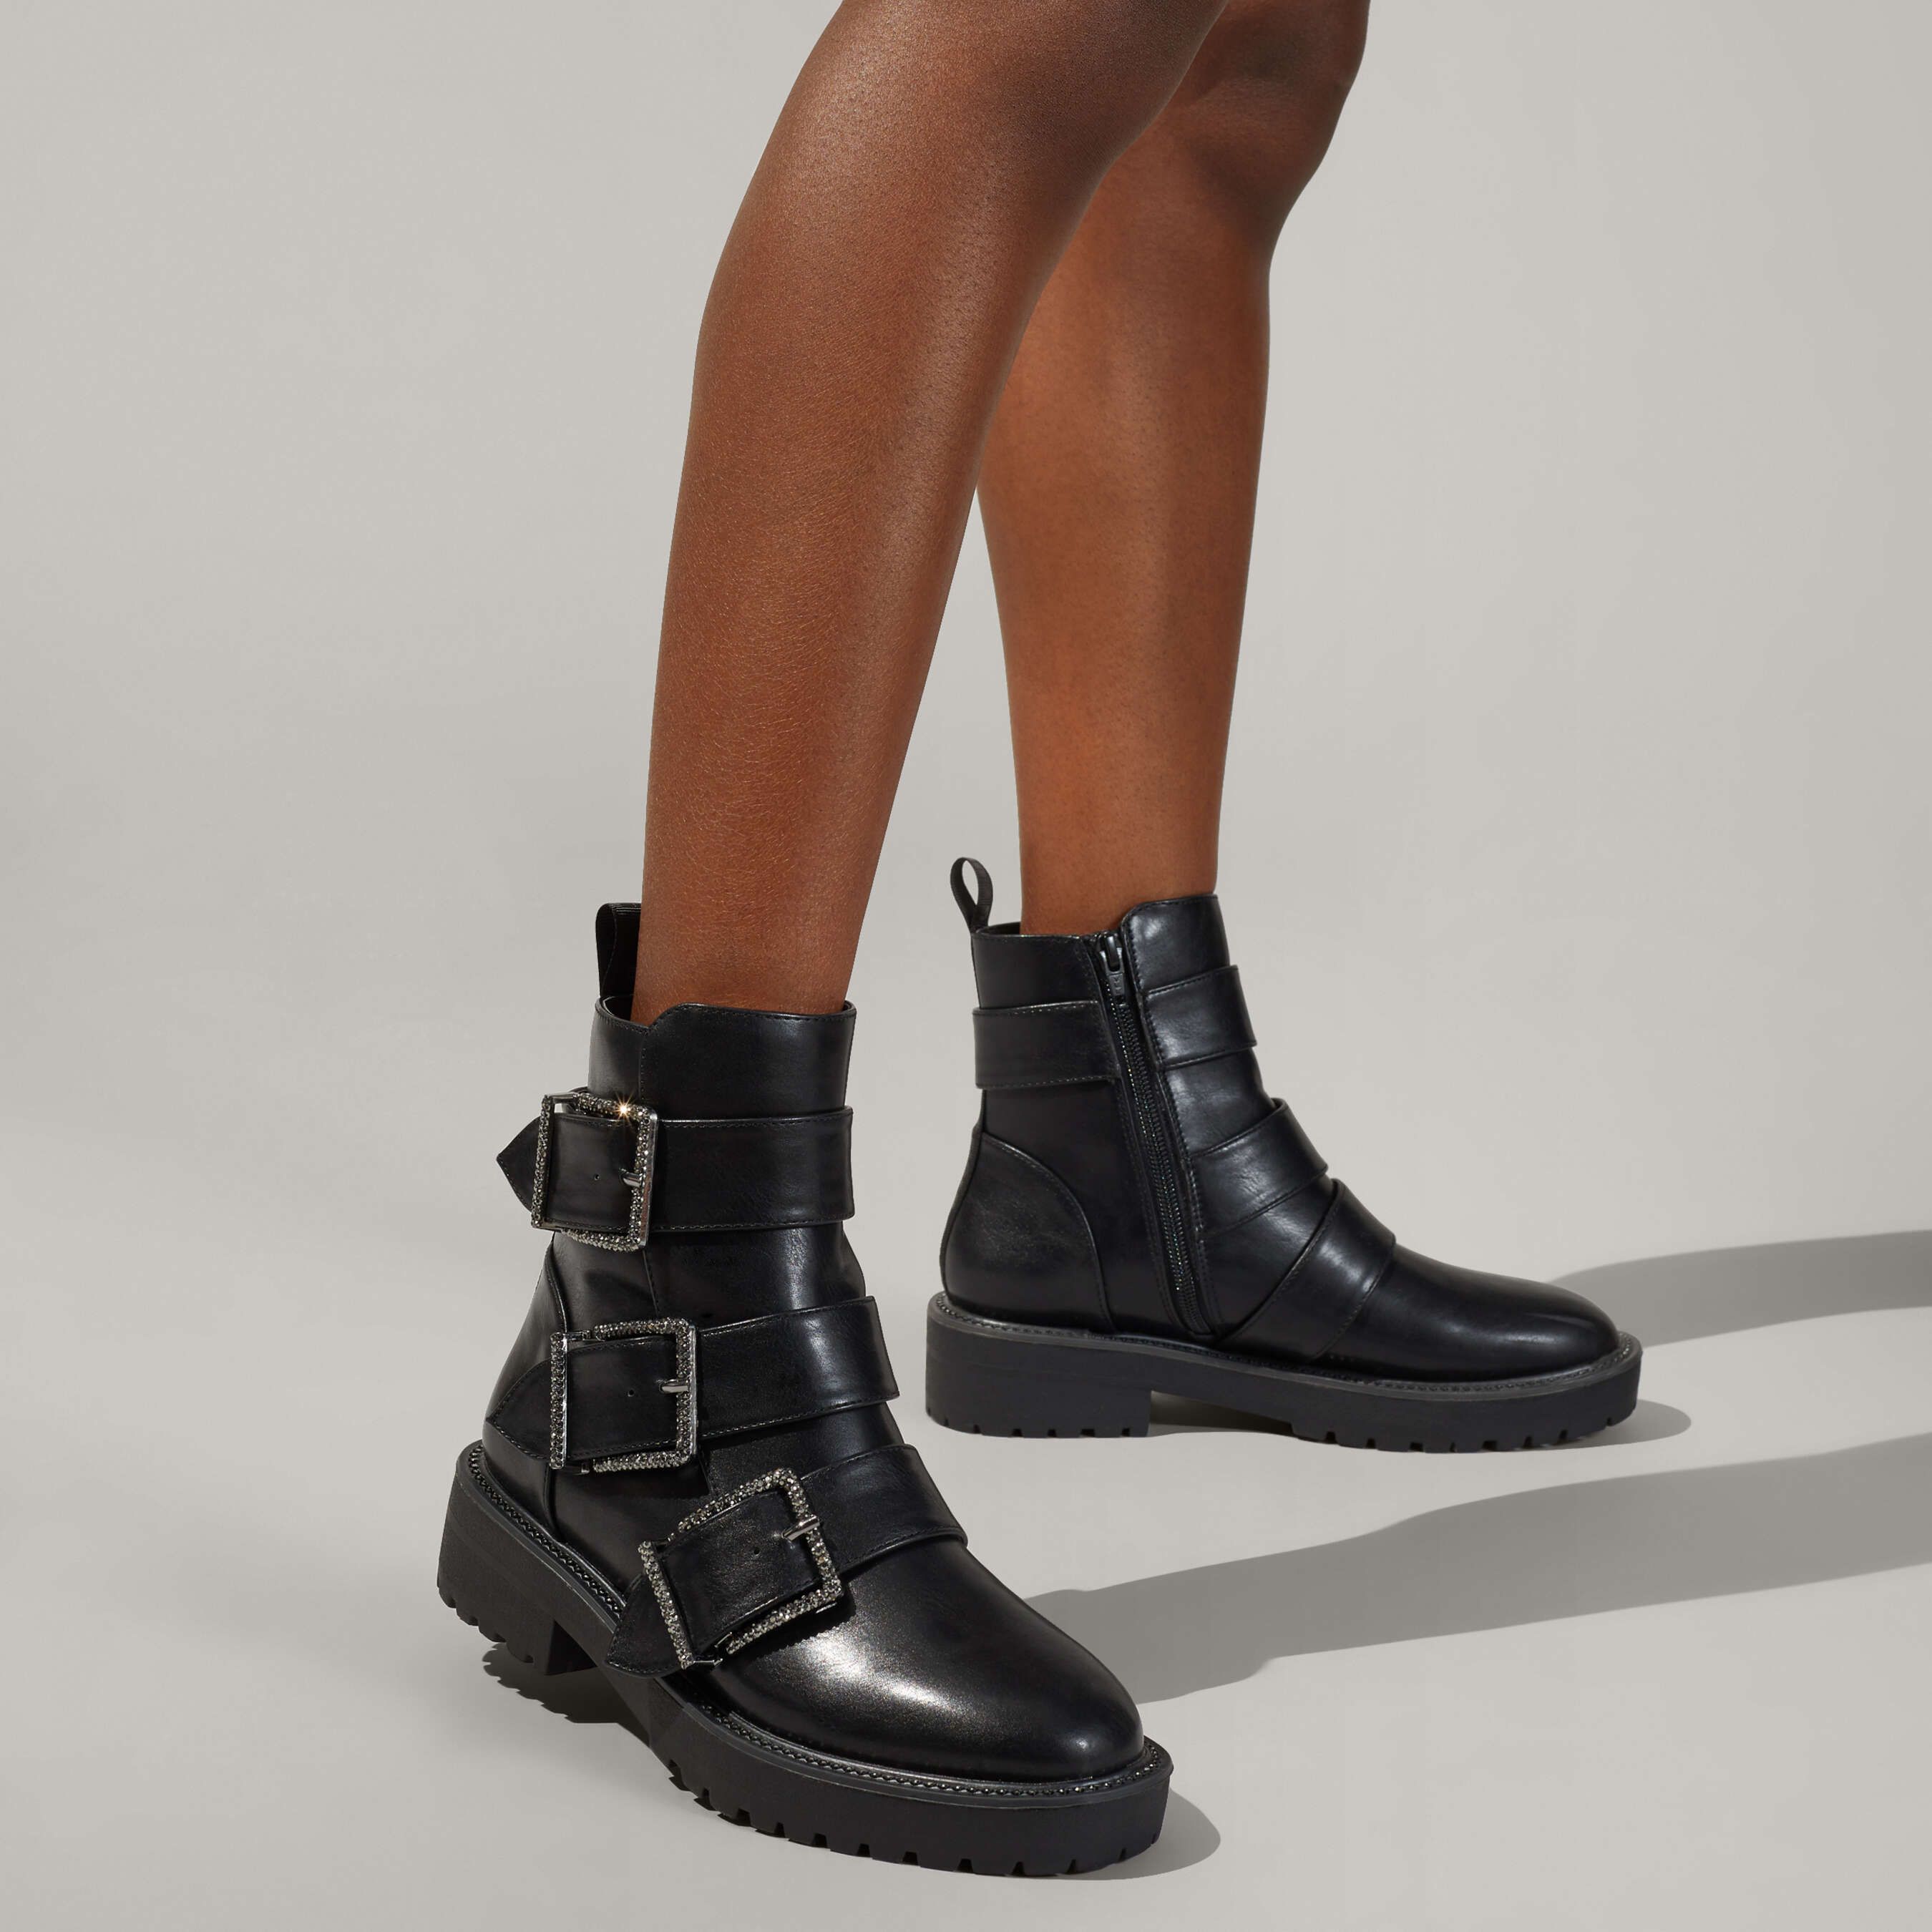 The Trixie2 ankle boot arrives in black with three straps across the foot that are fastened with crystal covered buckles. The KG Kurt Geiger logo printed on ribbed textile with a print stitch detailing is seen at the back of the ankle.